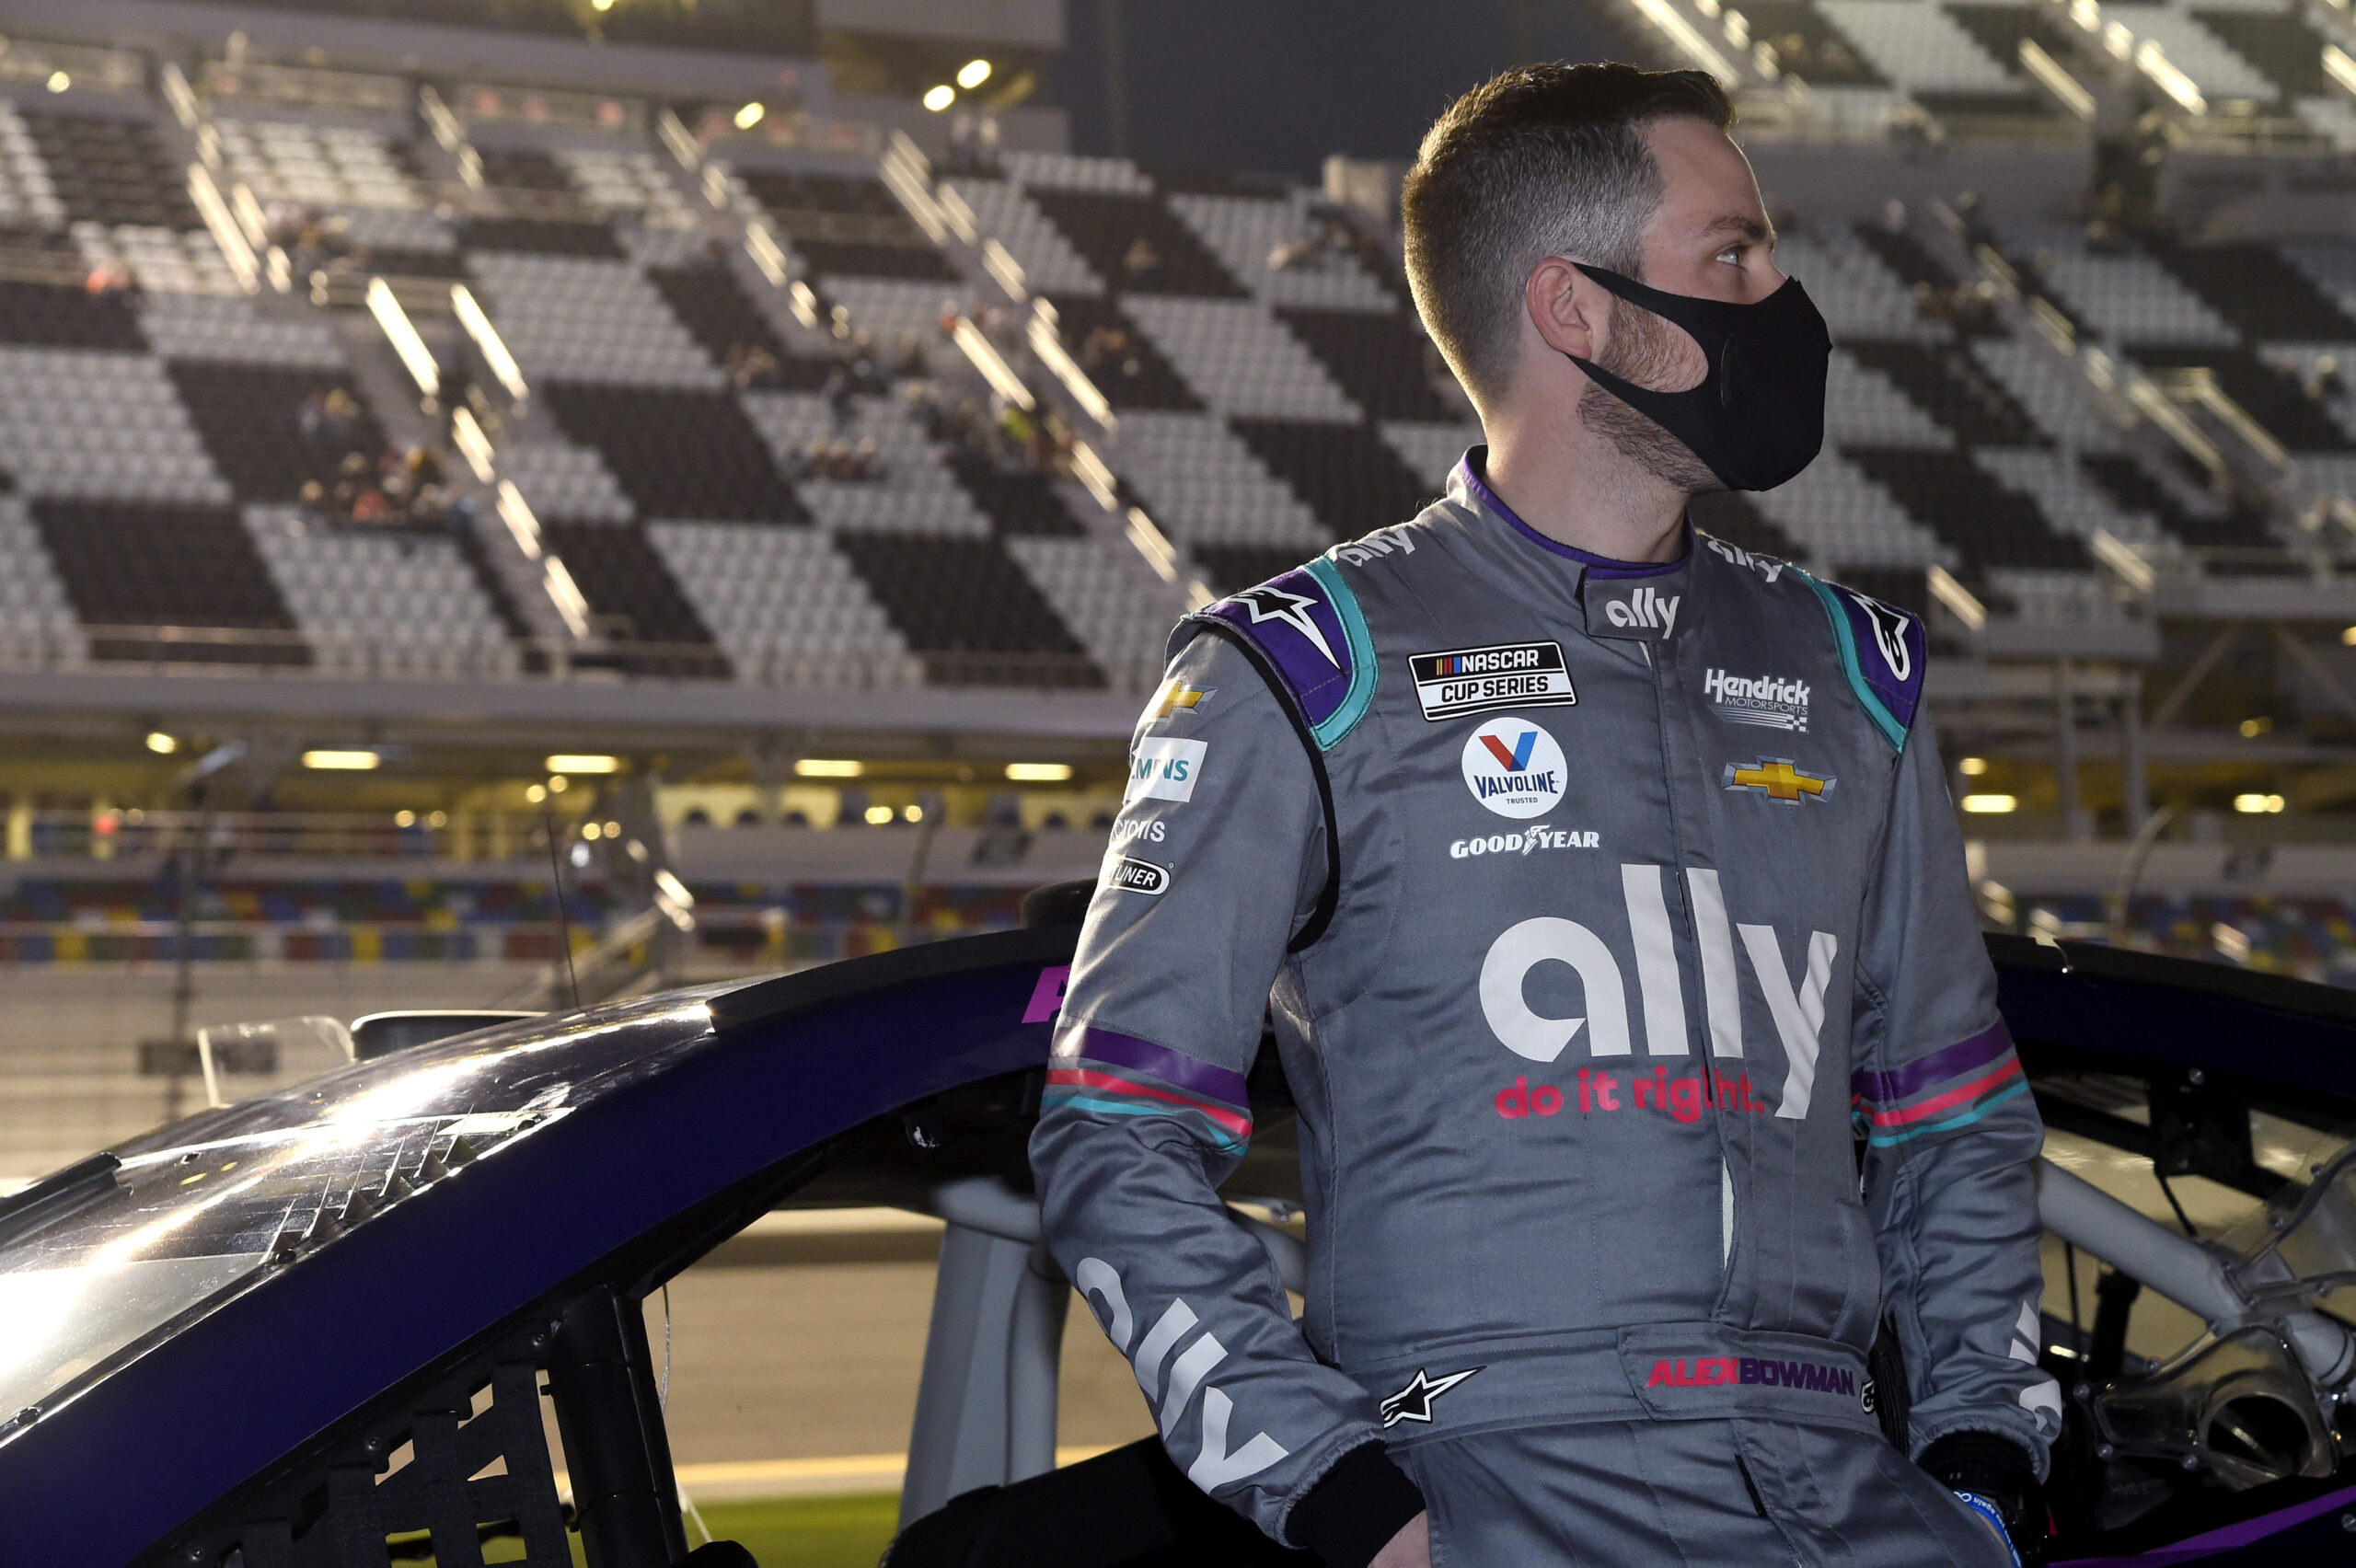 In particular, Alex Bowman's determination rewarded him with a lifechanging opportunity. (Photo: Hendrick Motorsports)